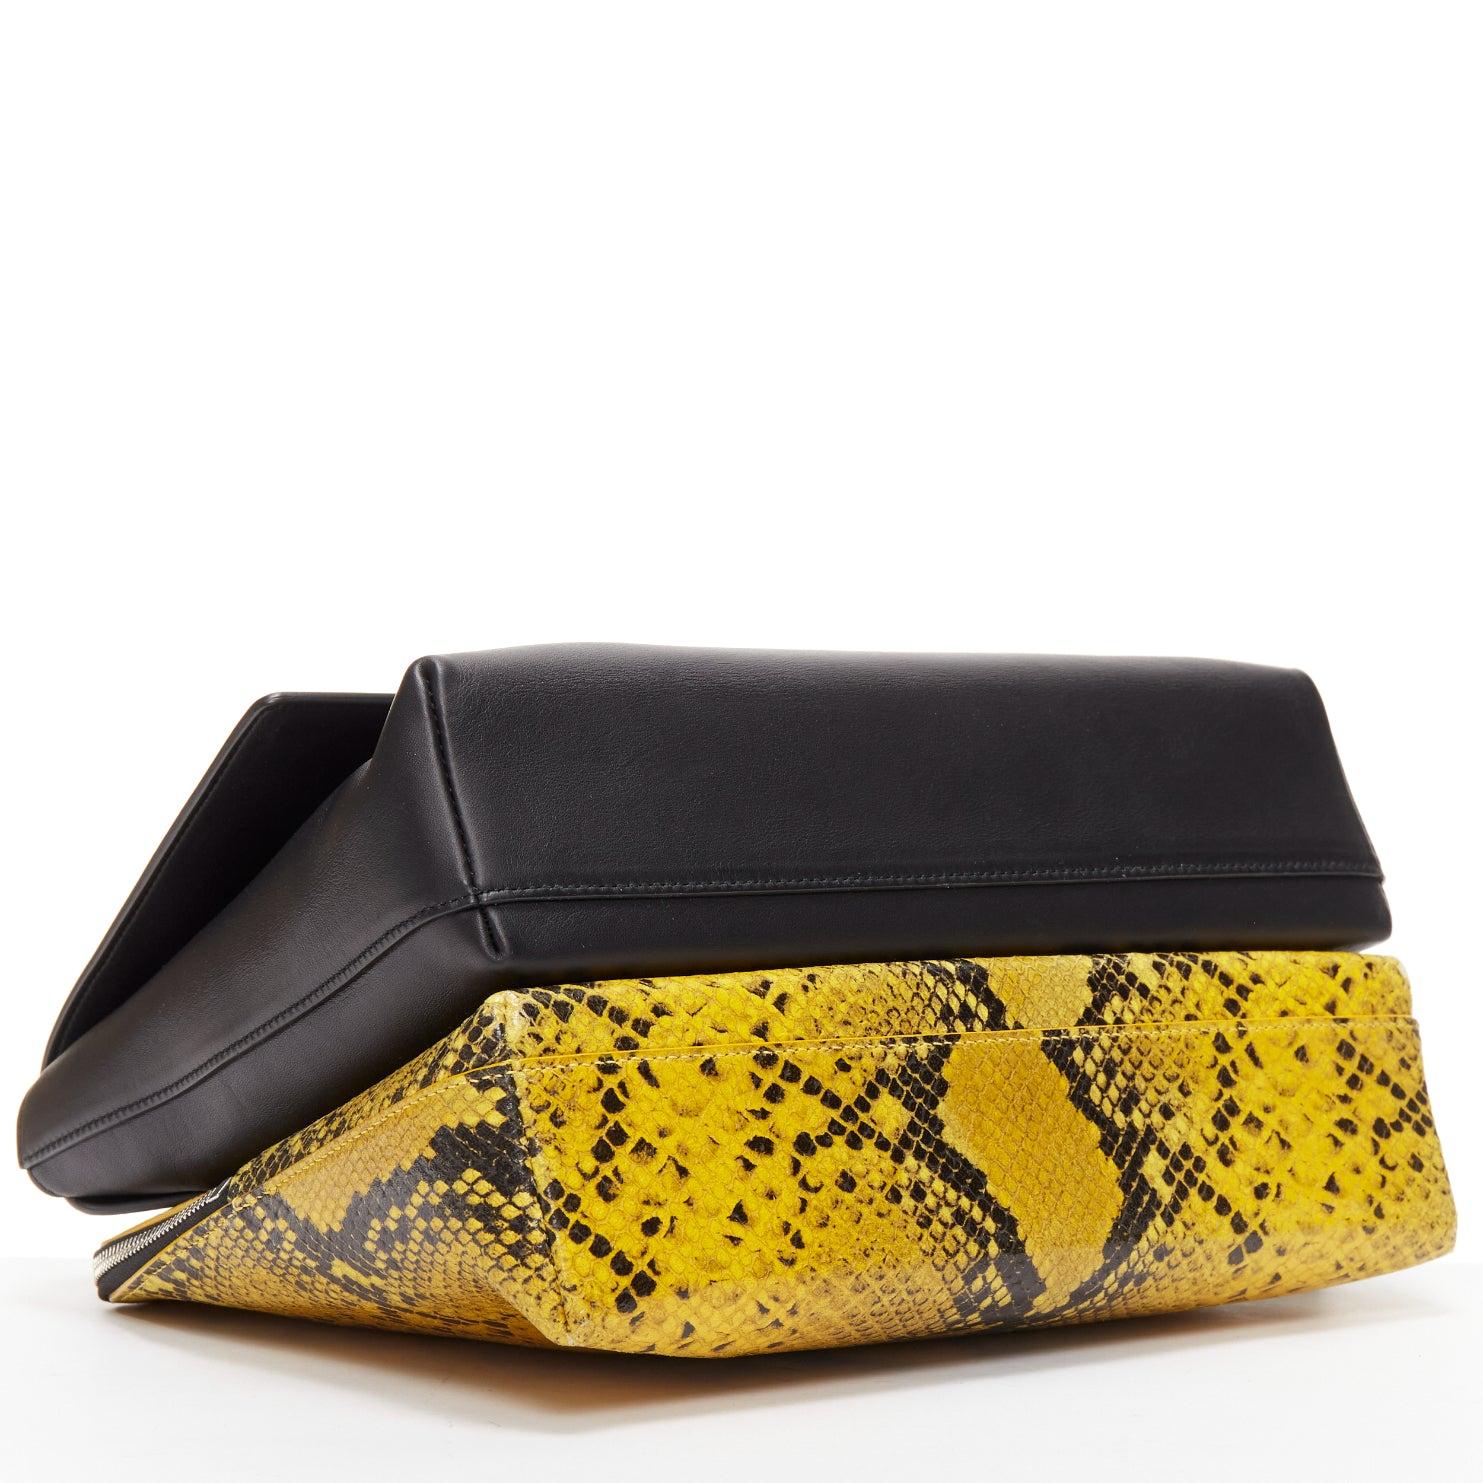 CHRISTOPHER KANE Dual black yellow scaled leather plastic strap reversible bag For Sale 2